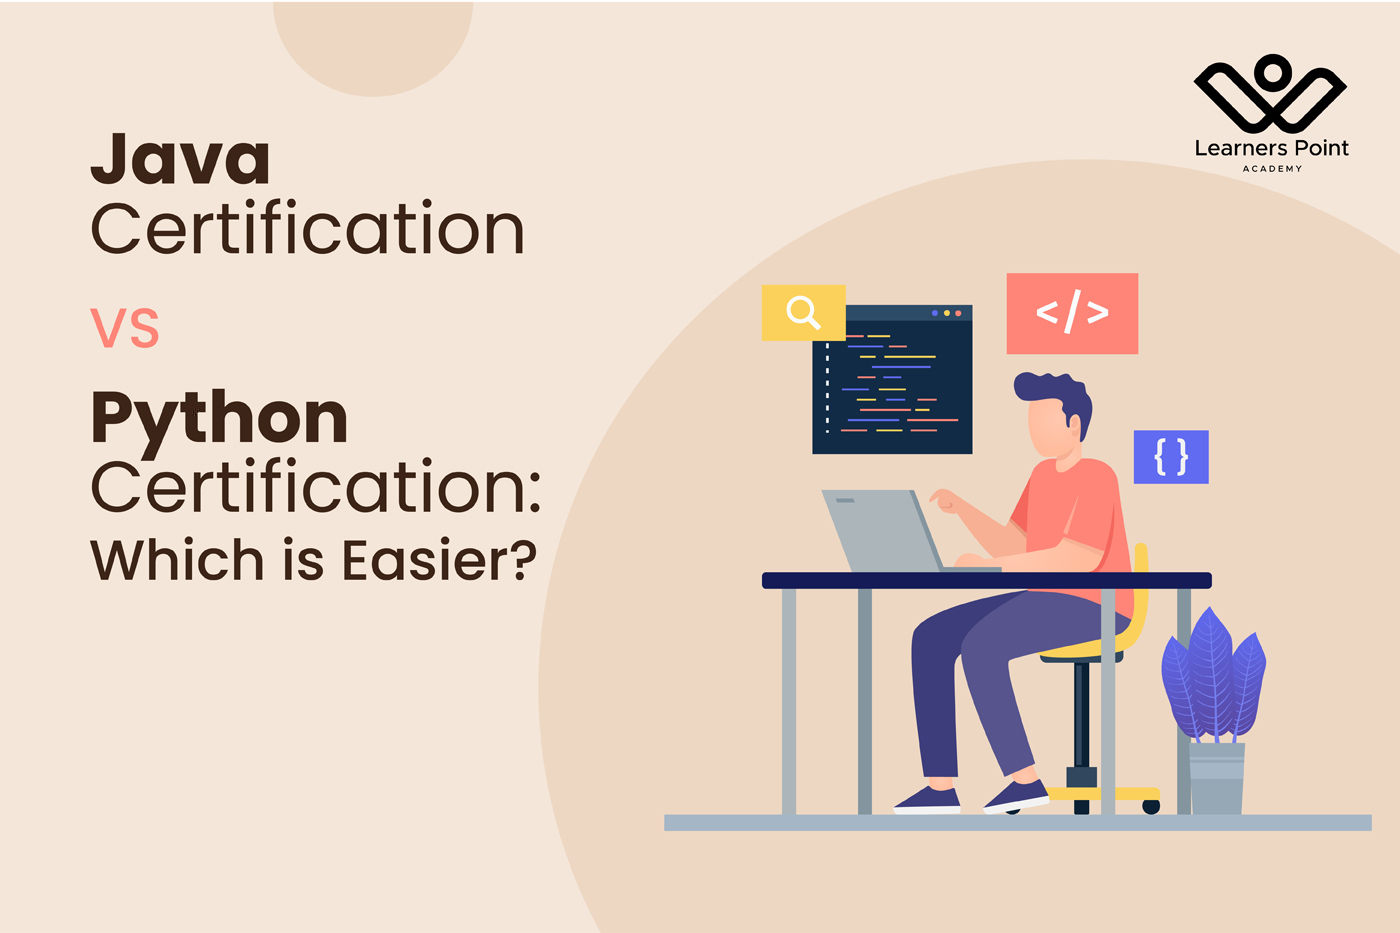 Java Certification Course VS Python Certification Course: Which is Easier?